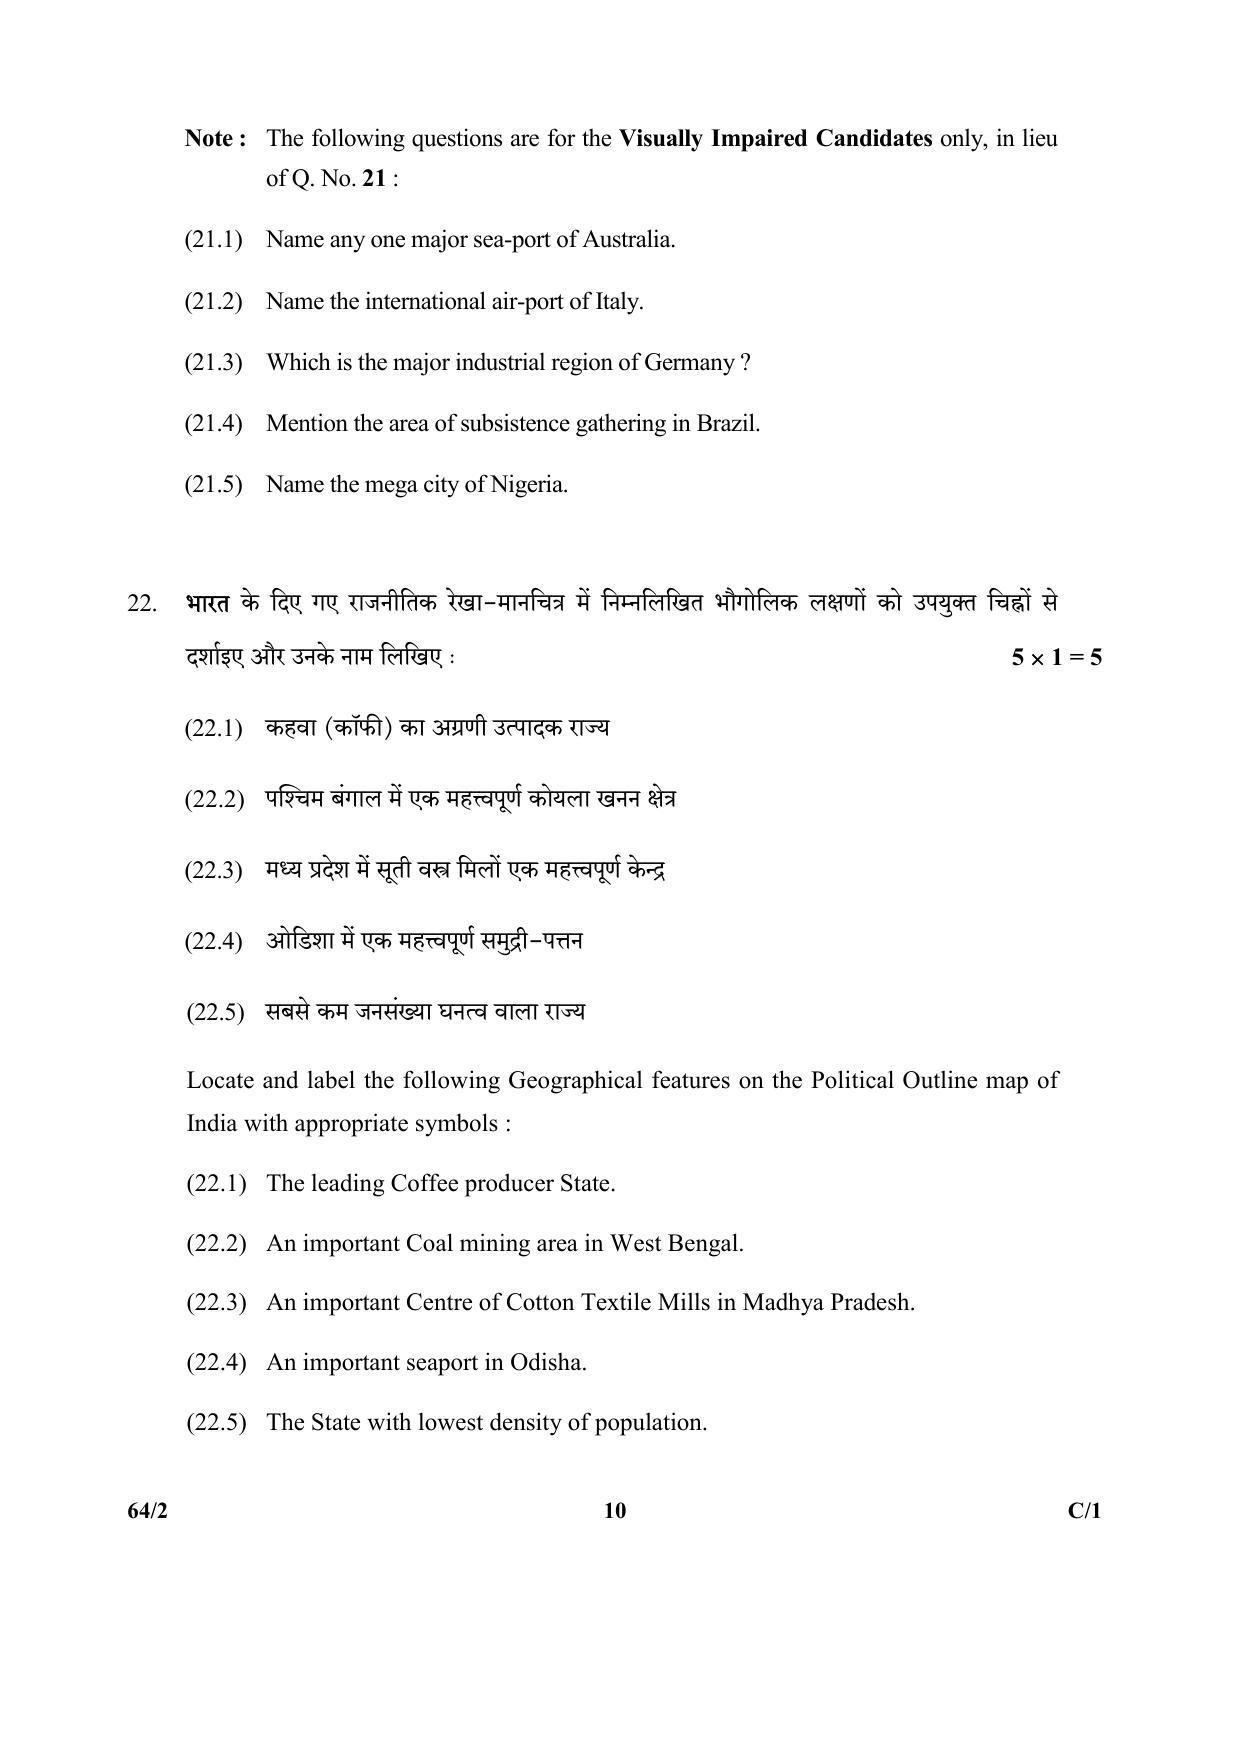 CBSE Class 12 64-2 (Geography) 2018 Compartment Question Paper - Page 10